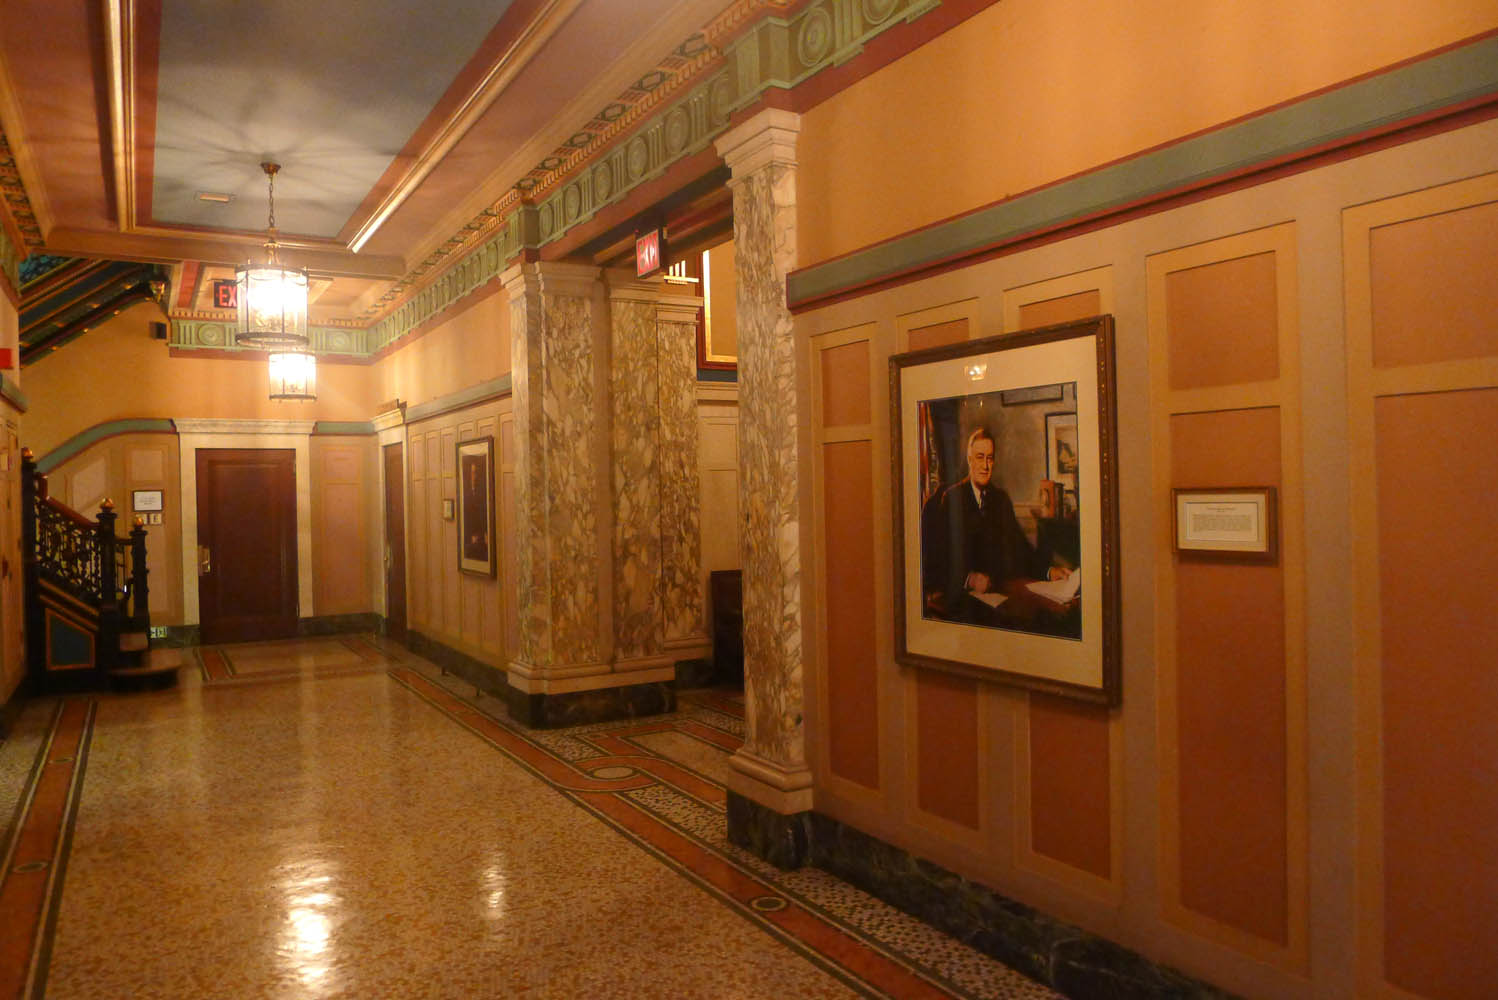 The hallways which lead to the 13 lodges